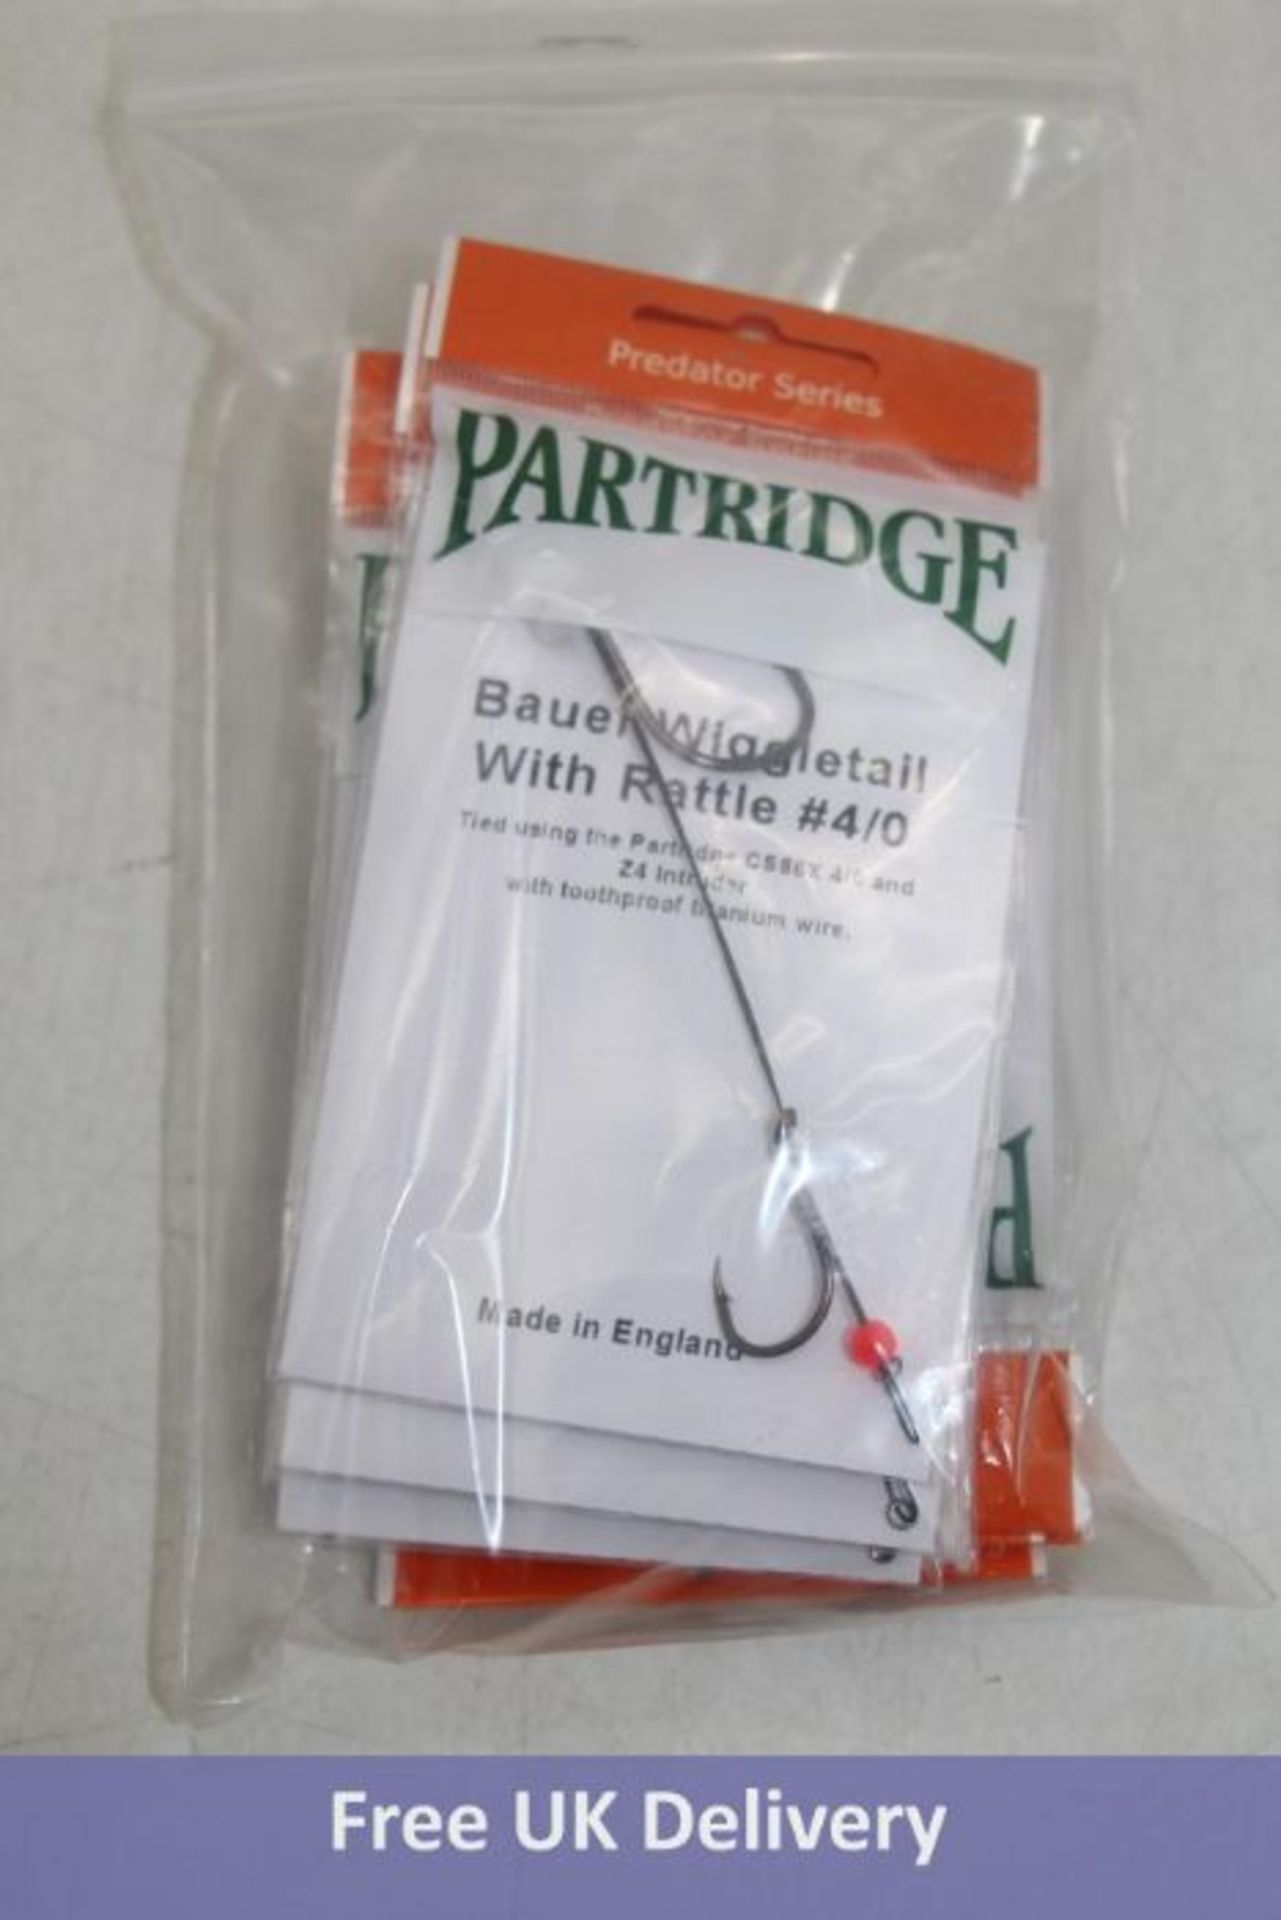 Ten Partridge Bauer Wiggletail Pike Rig with Rattle, #4/0